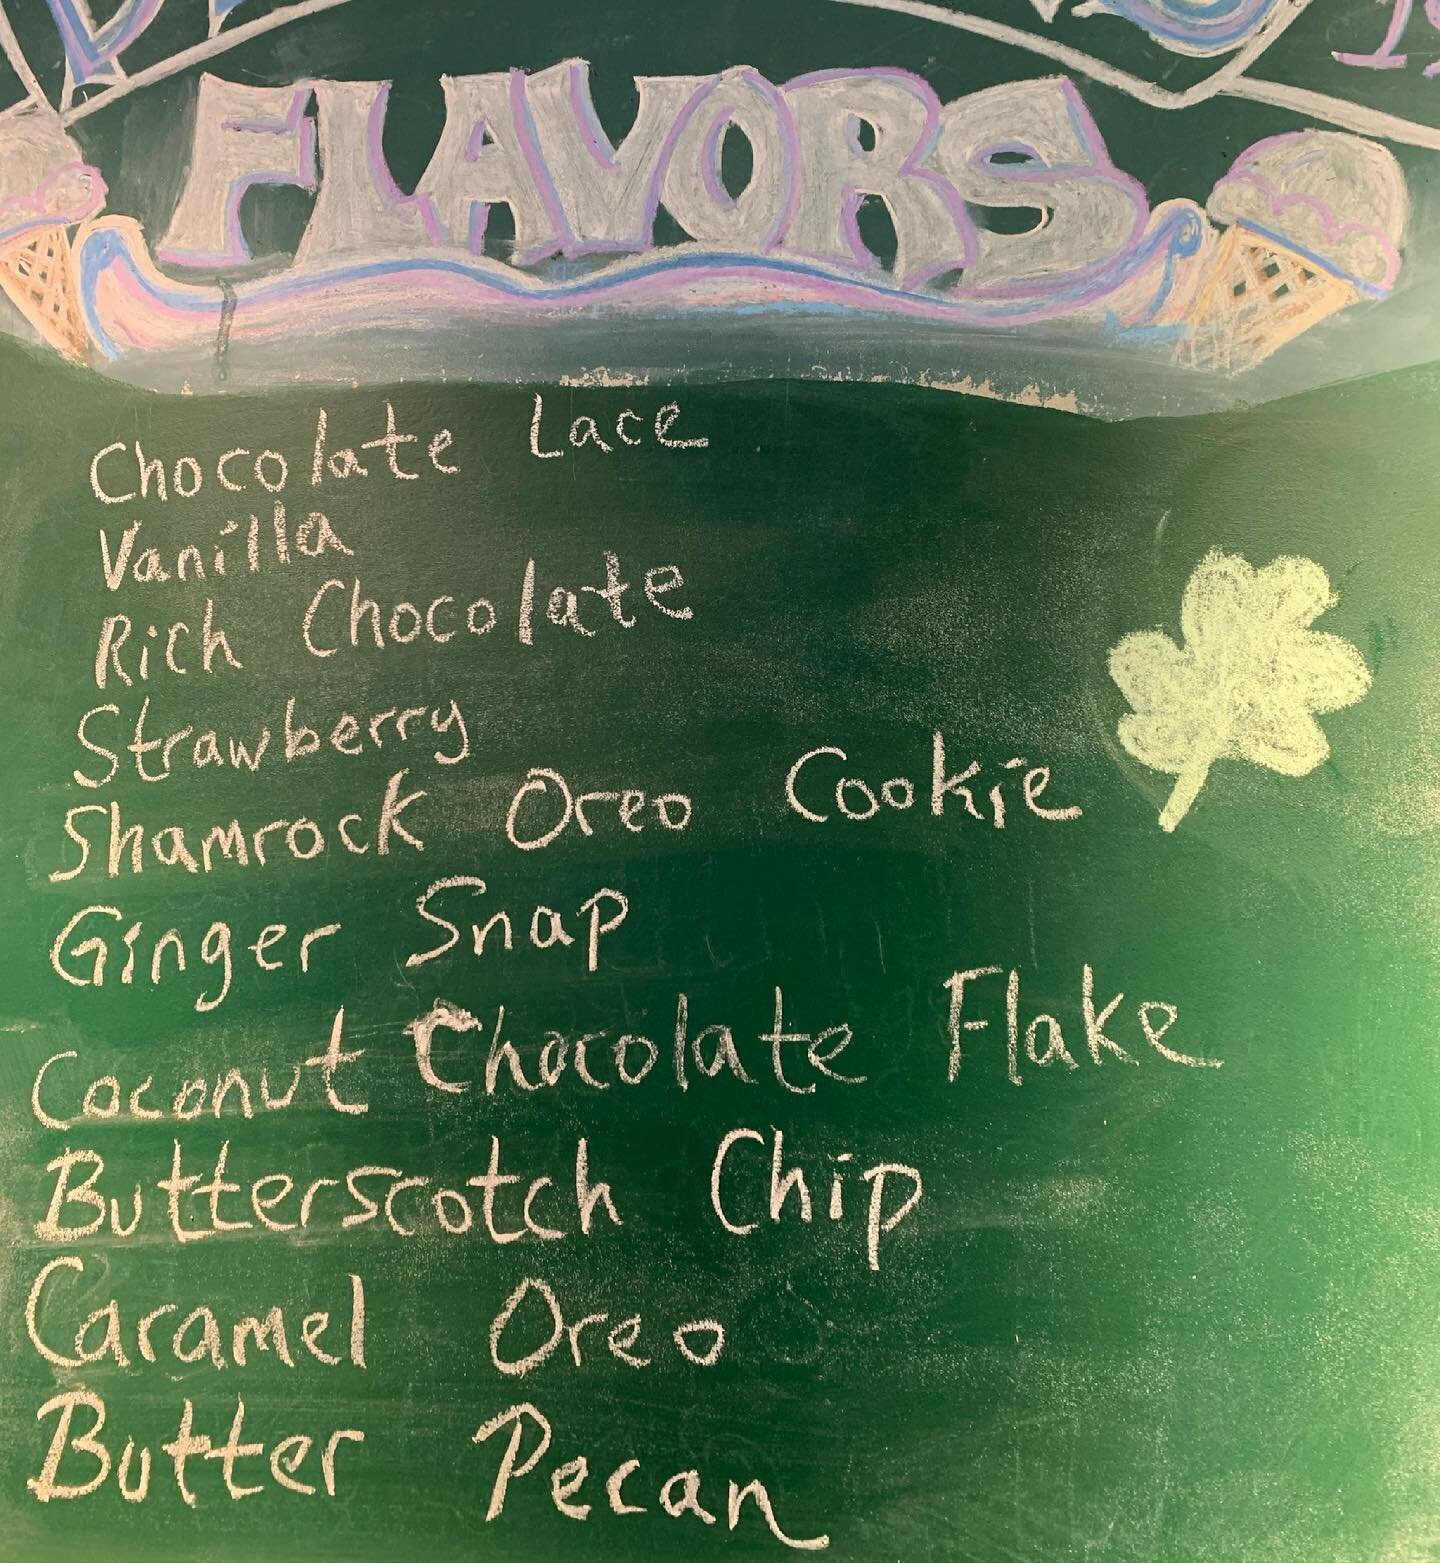 HAPPY ☘️ ST. PATRICK&rsquo;S DAY!! 
Our artisan ice cream maker prepared a special flavor to help celebrate.  A green mint flavored ice cream with Oreo cookies.... yummy right?!!! Would make an awesome milkshake too! #minticecream #oreoicecream #happ